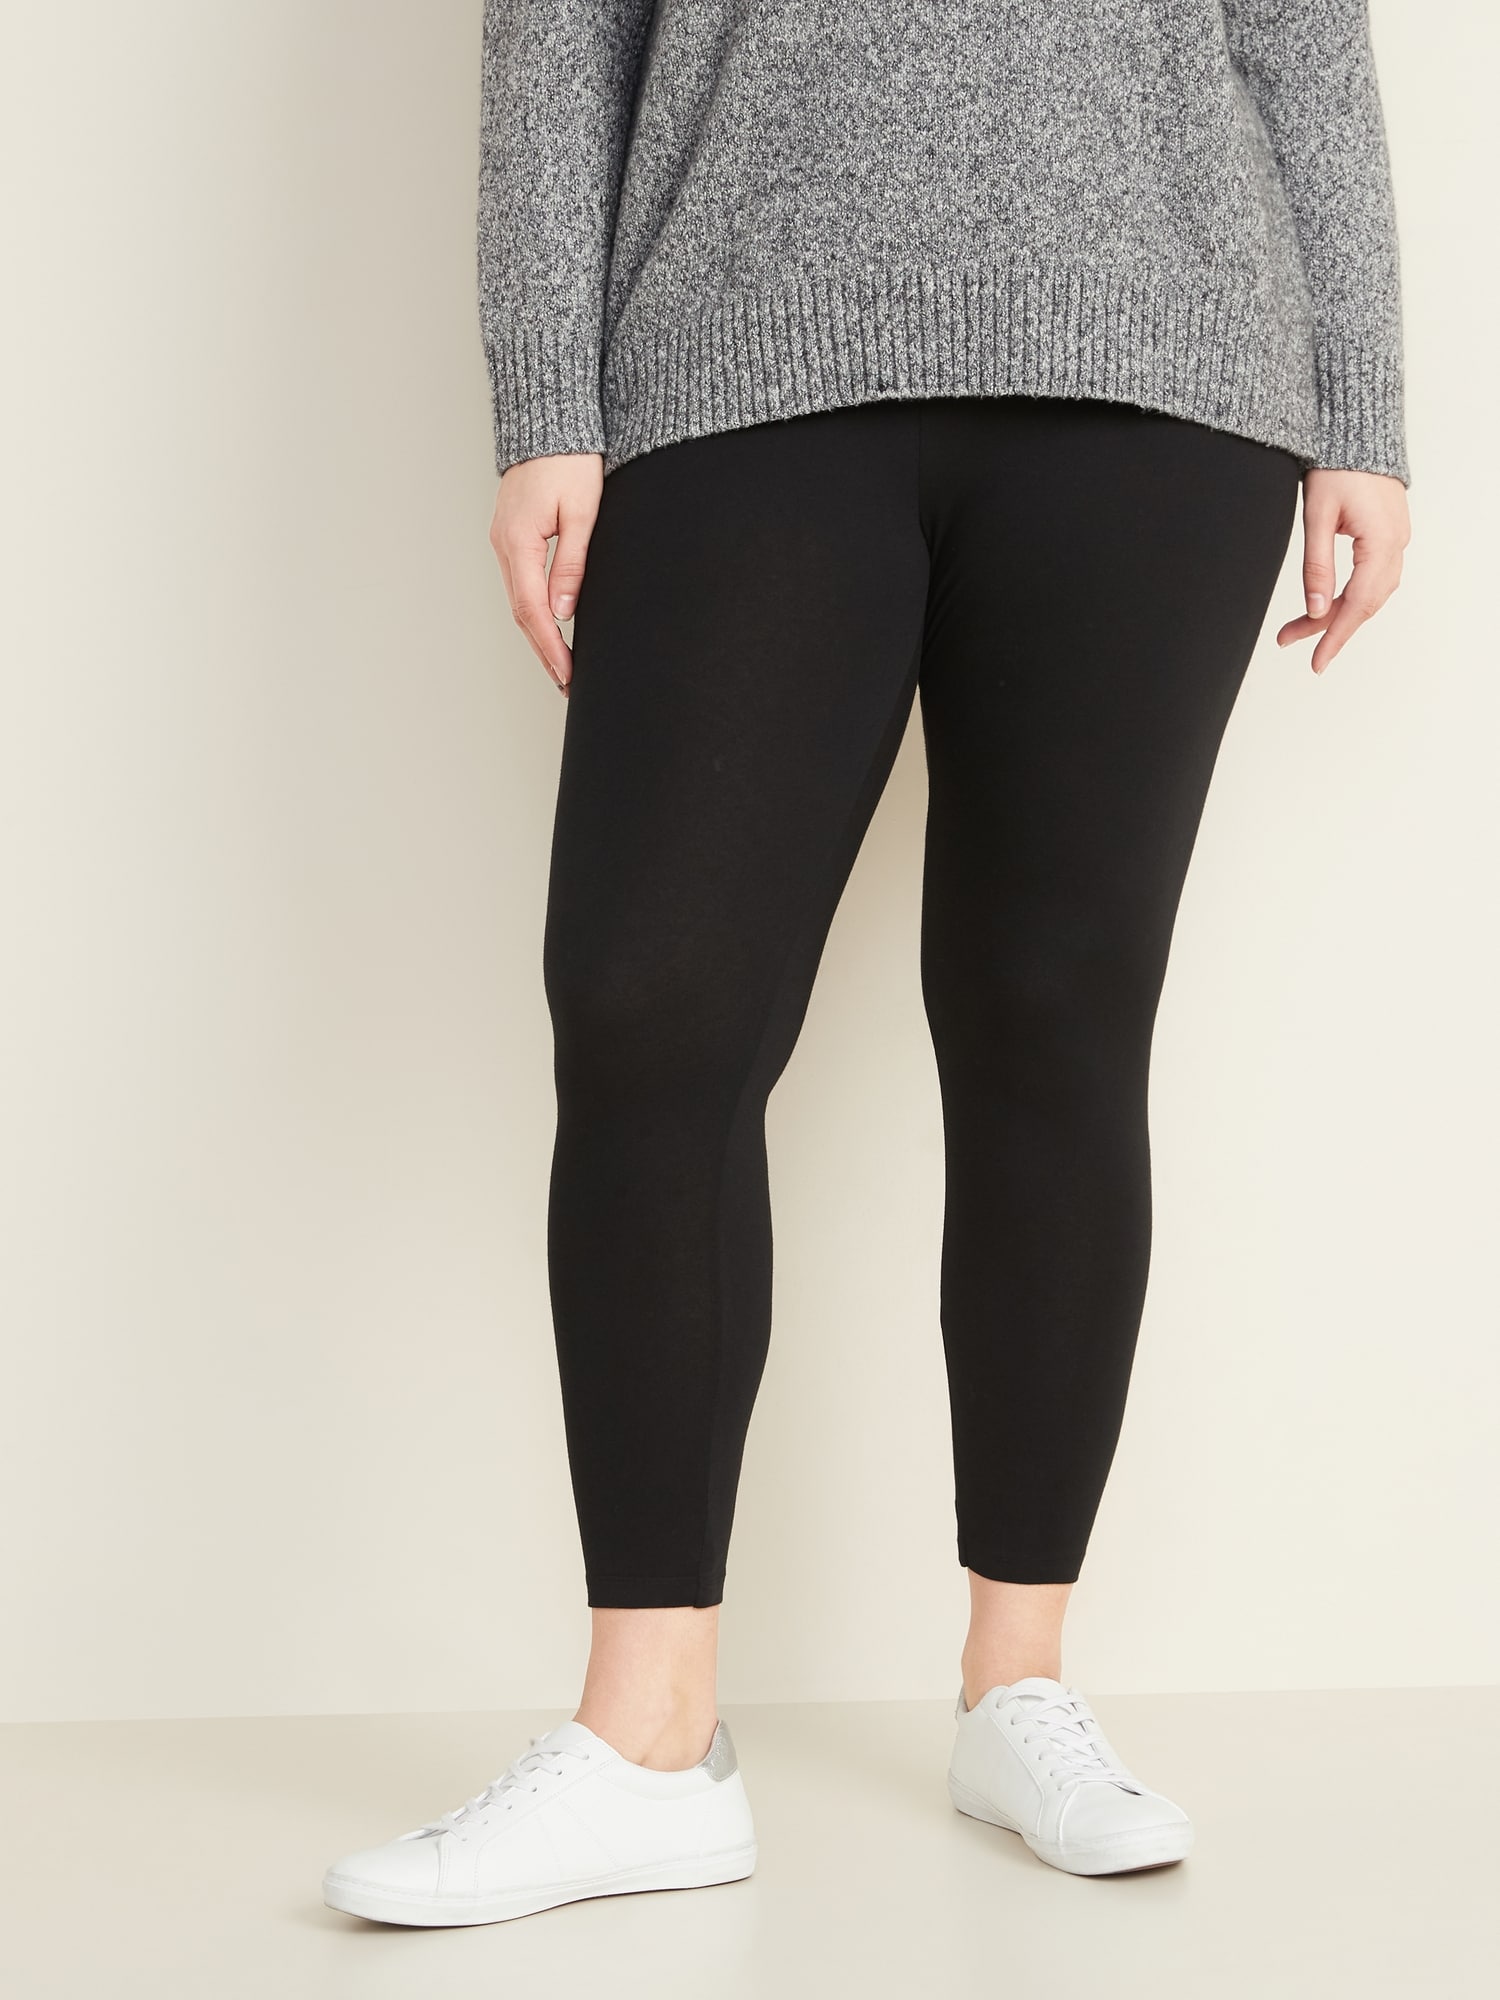 Women's/Youth Leggings by Old Navy Black in color Size 10/14 RN 54023